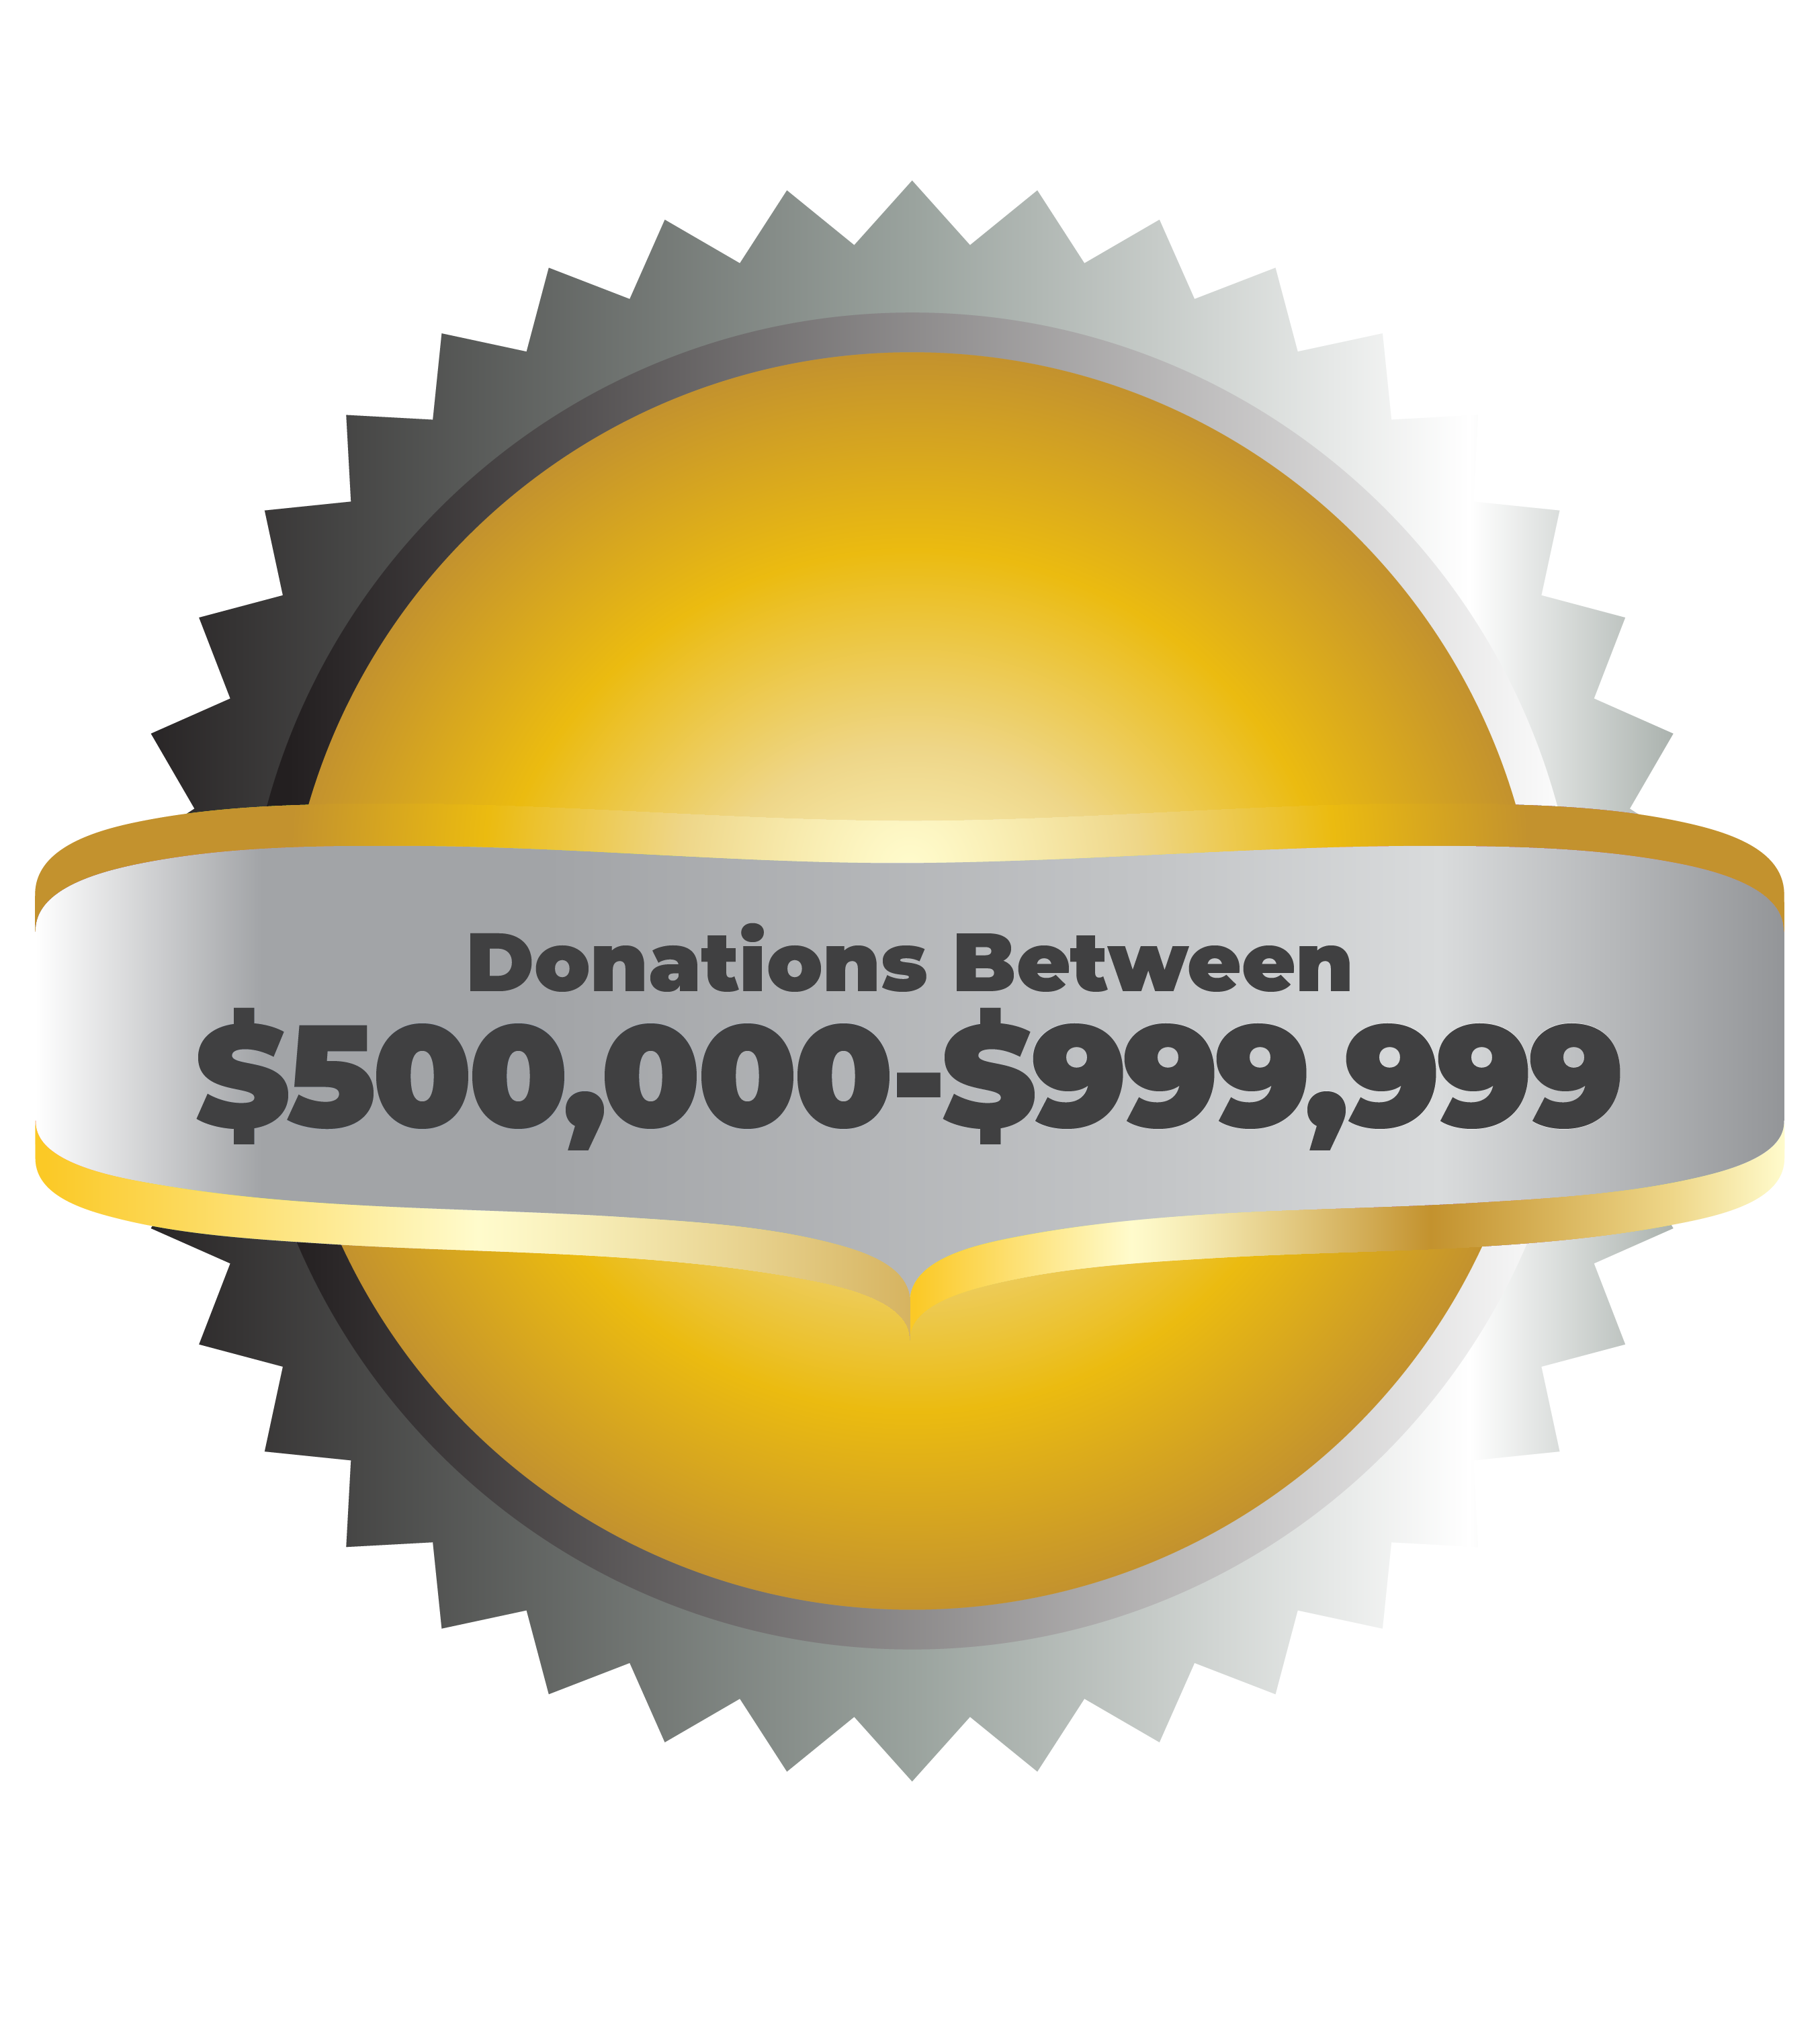 Donations Between $500,000 and $999,999